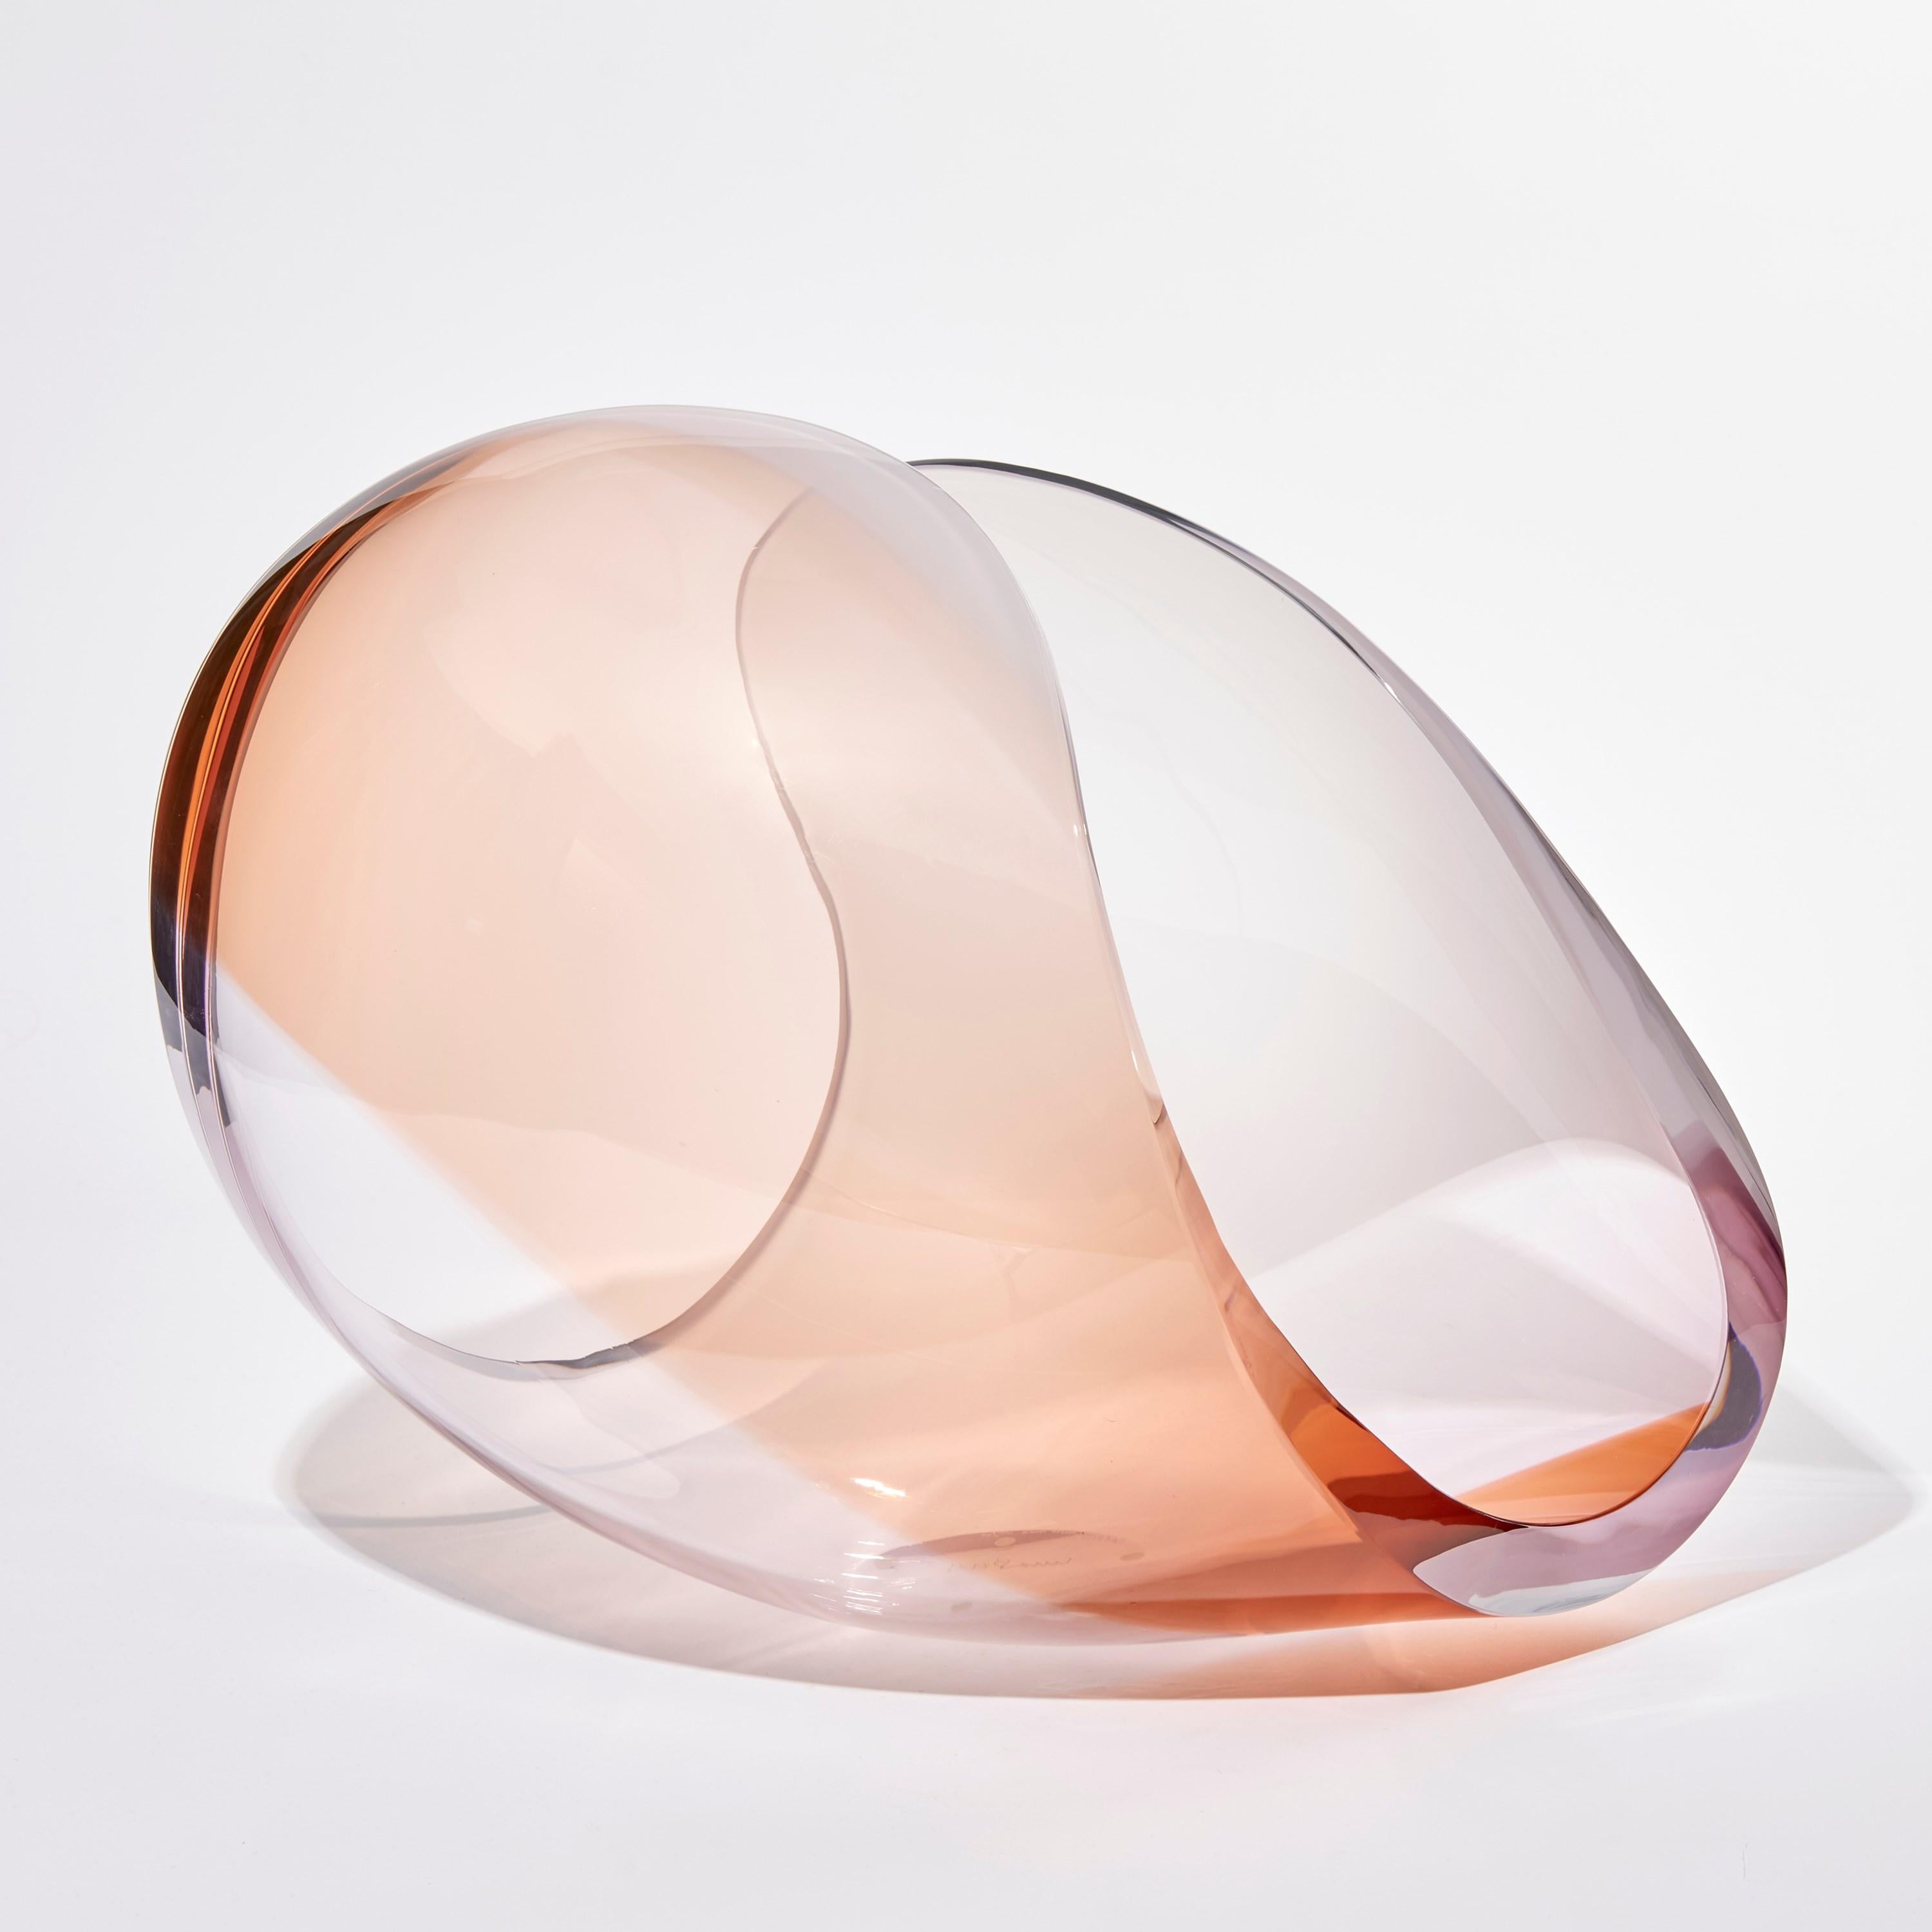 Planet in Amber & Pink is a unique glass sculptural artwork and centerpiece by the Swedish artist Lena Bergström. This piece is from an ongoing collection of works called the Planets which the artist has revisited several times throughout her